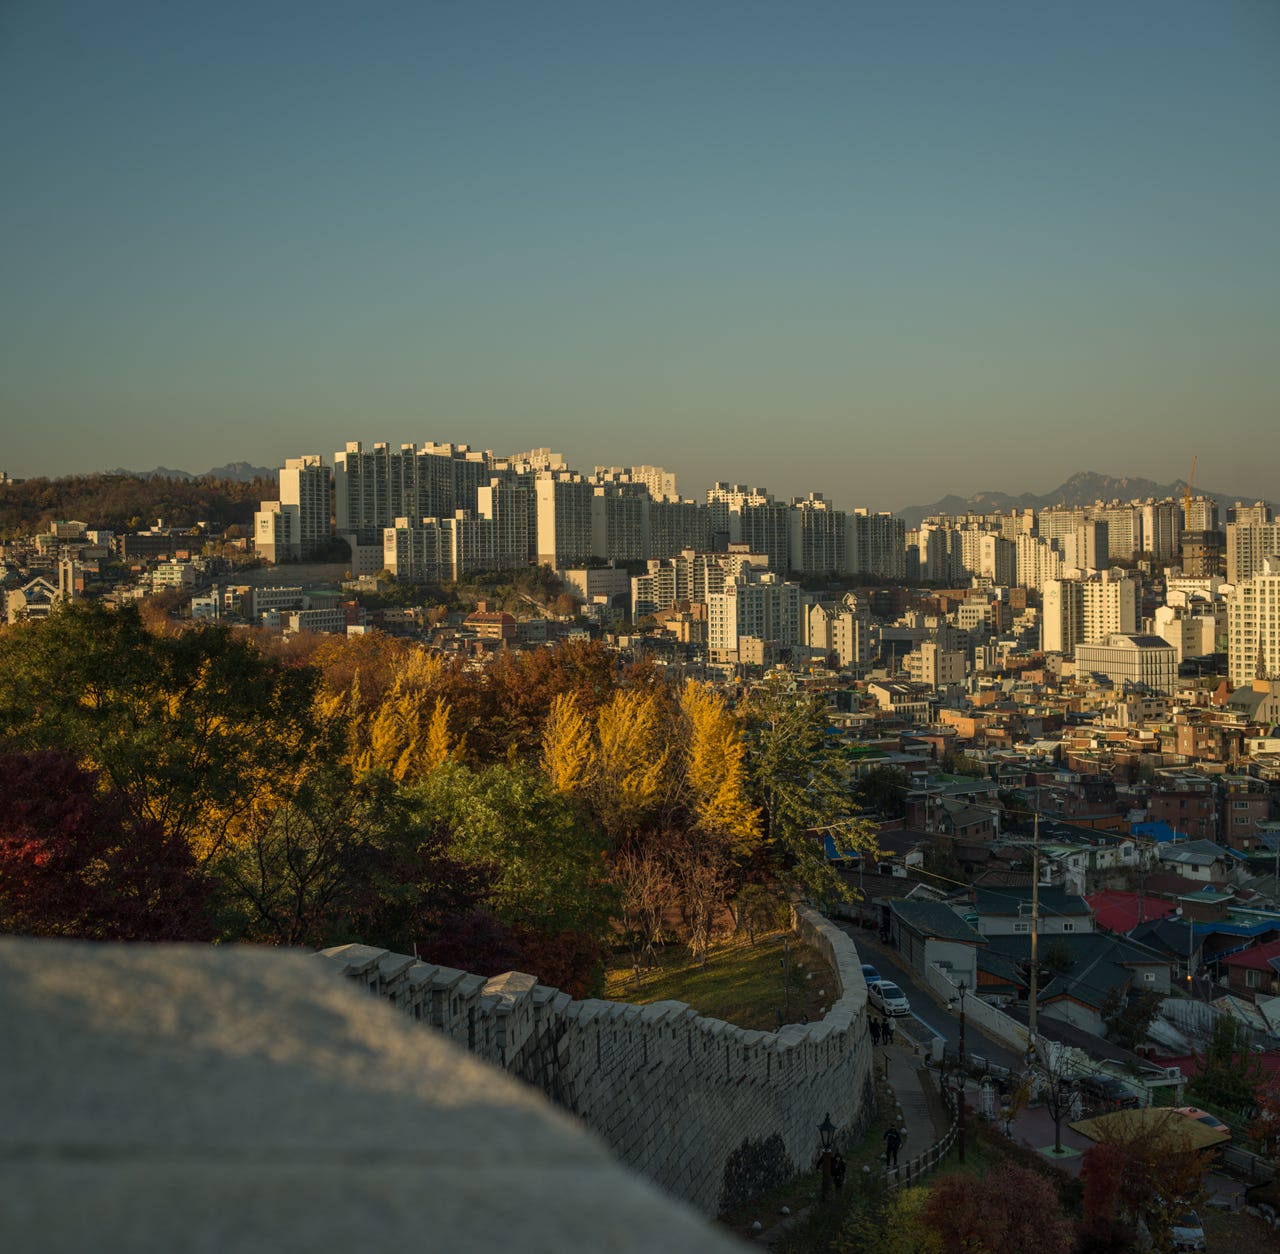 Fall foliage in Naksan Park, where Seoul Fortress Wall runs along the eastern edge of the old city center.